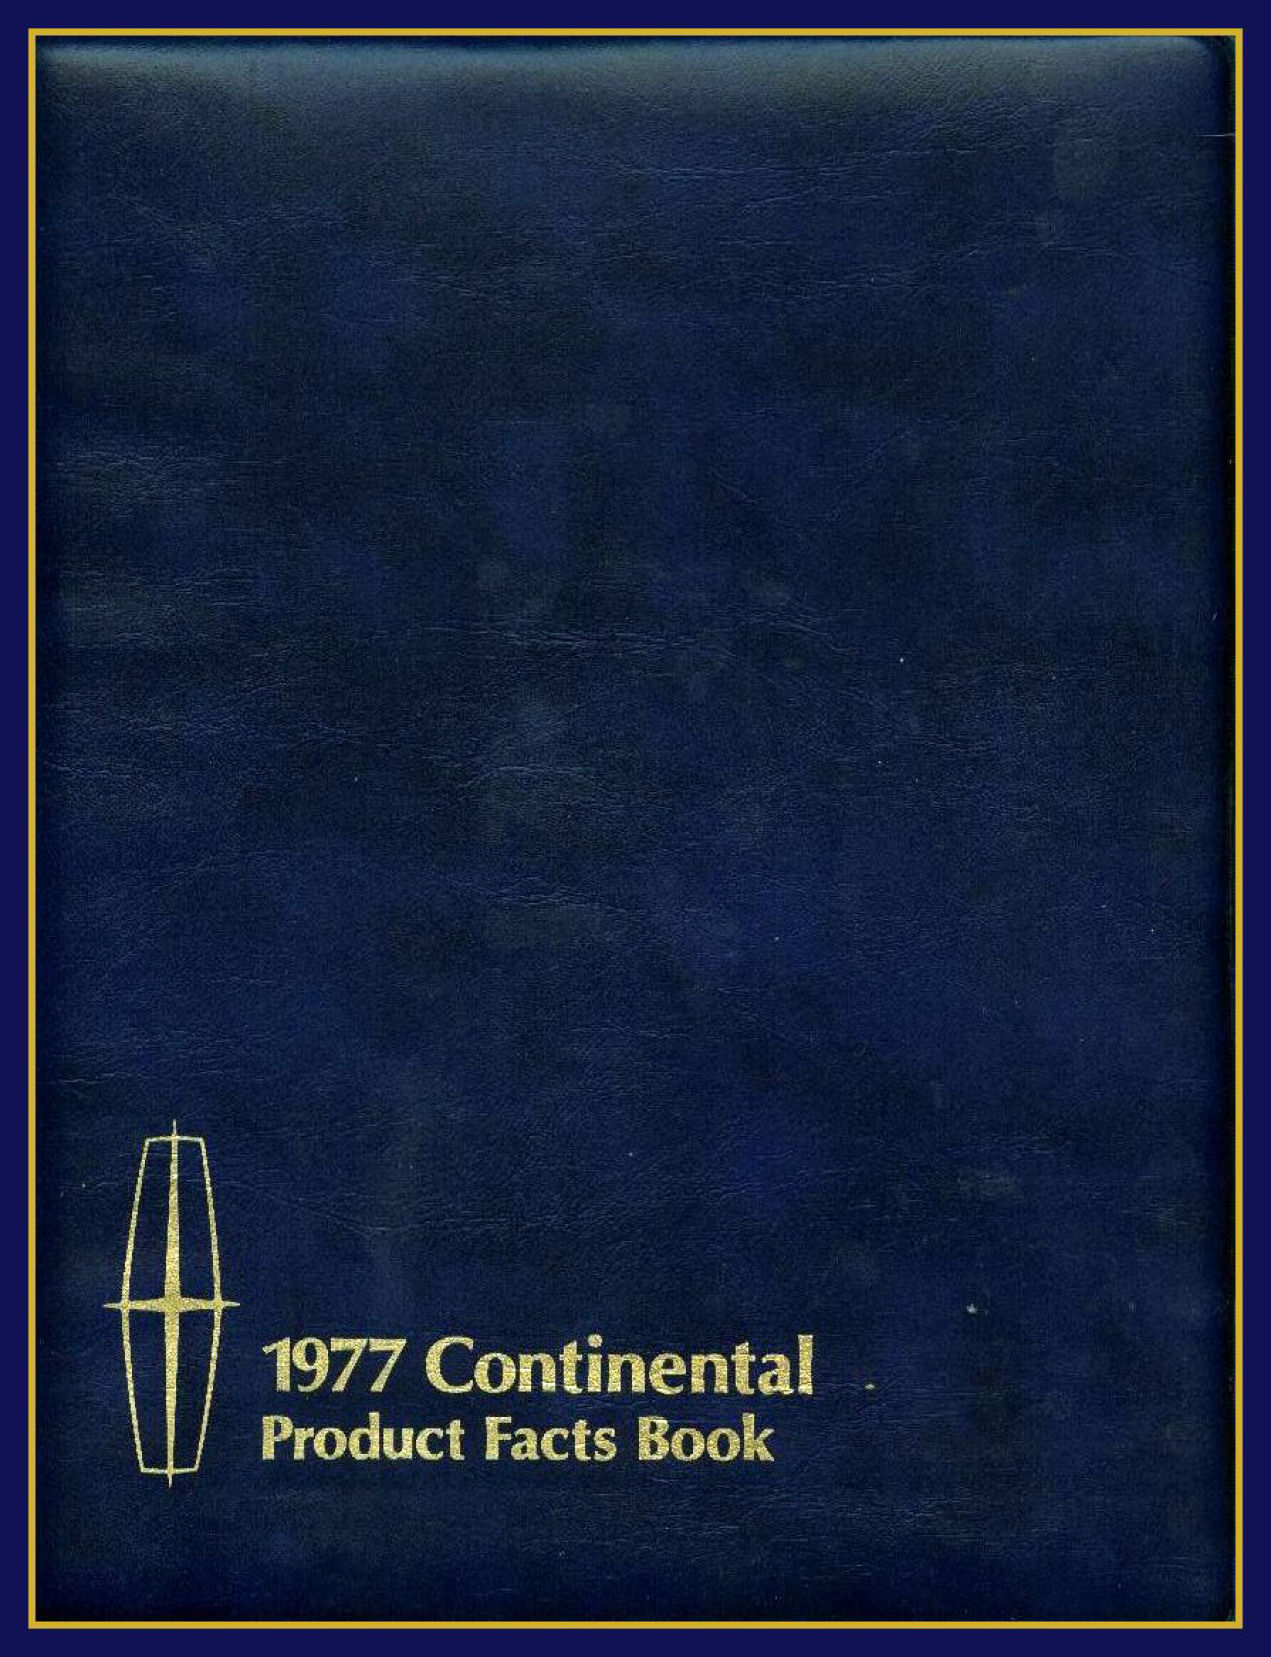 1977_Continental_Product_Facts_Book-0-00